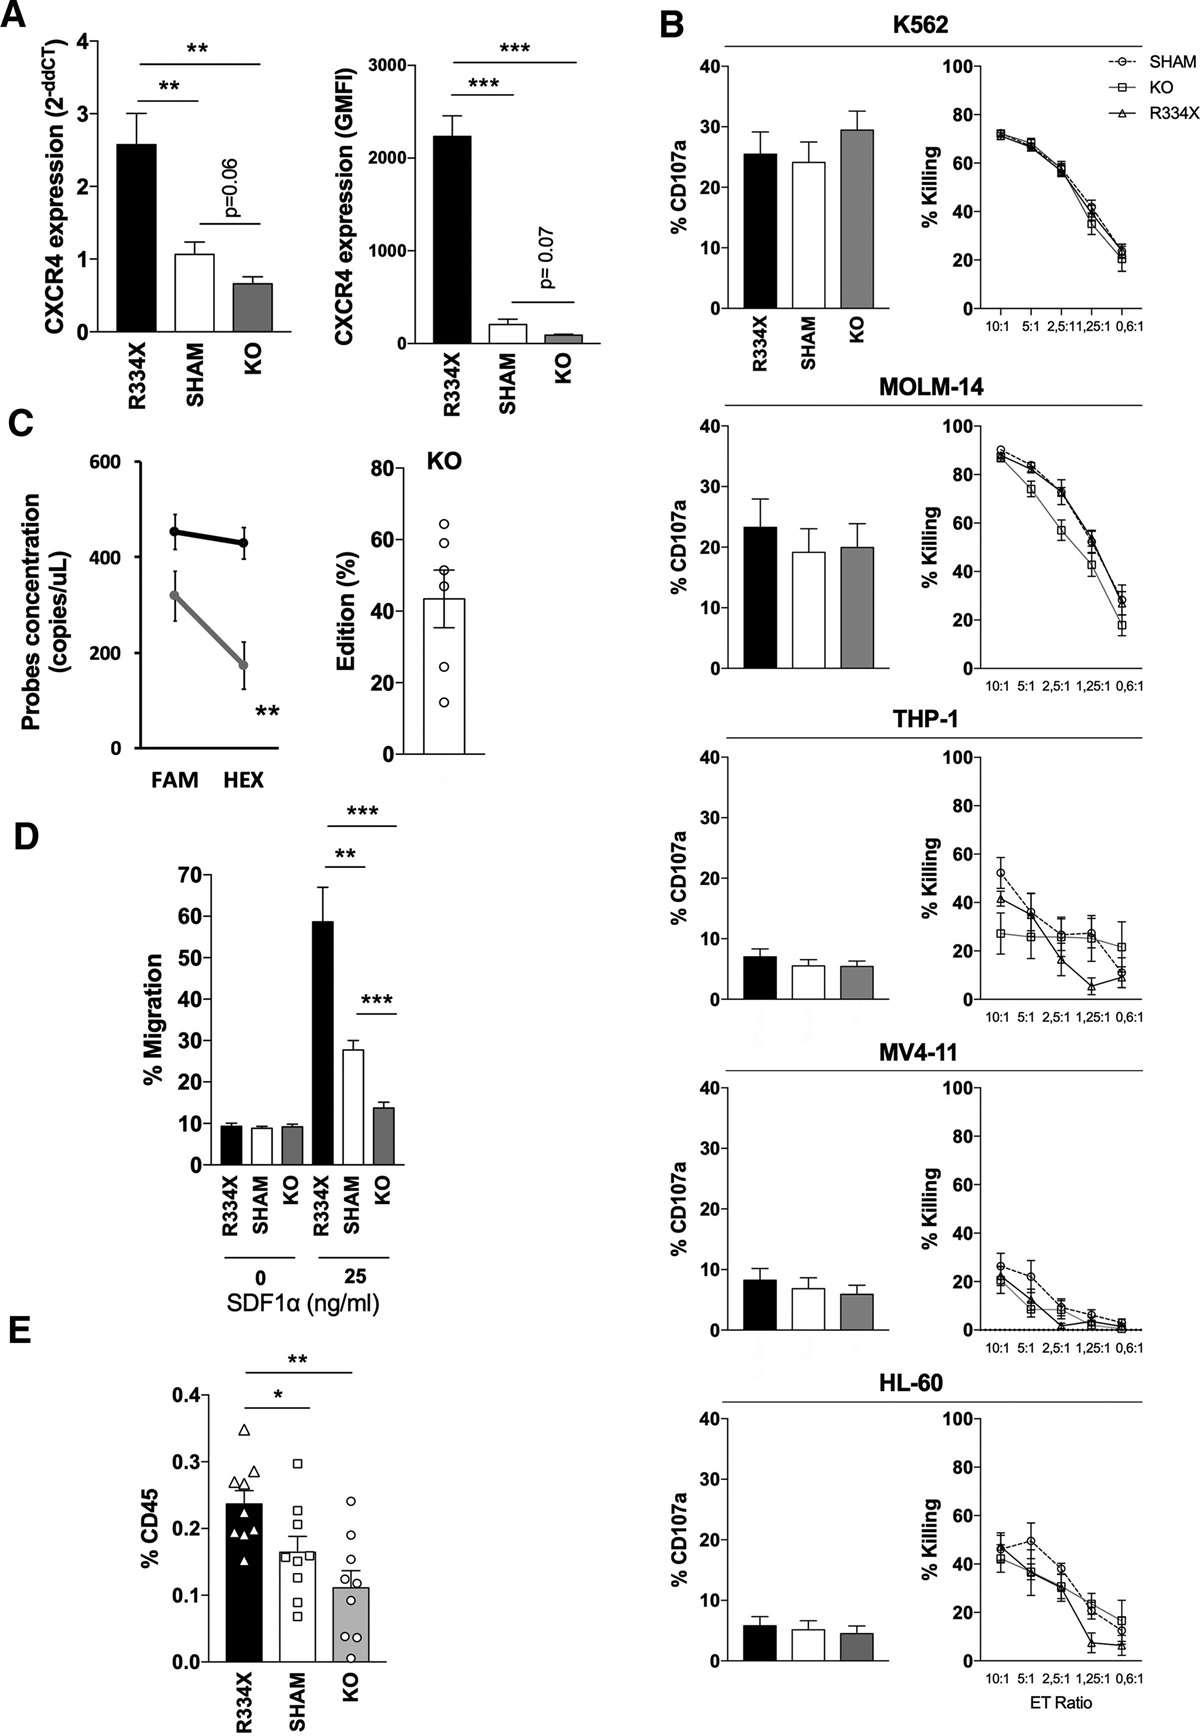 Improved Leukemia Clearance After Adoptive Transfer of NK Cells Expressing the Bone Marrow Homing Receptor CXCR4R334X